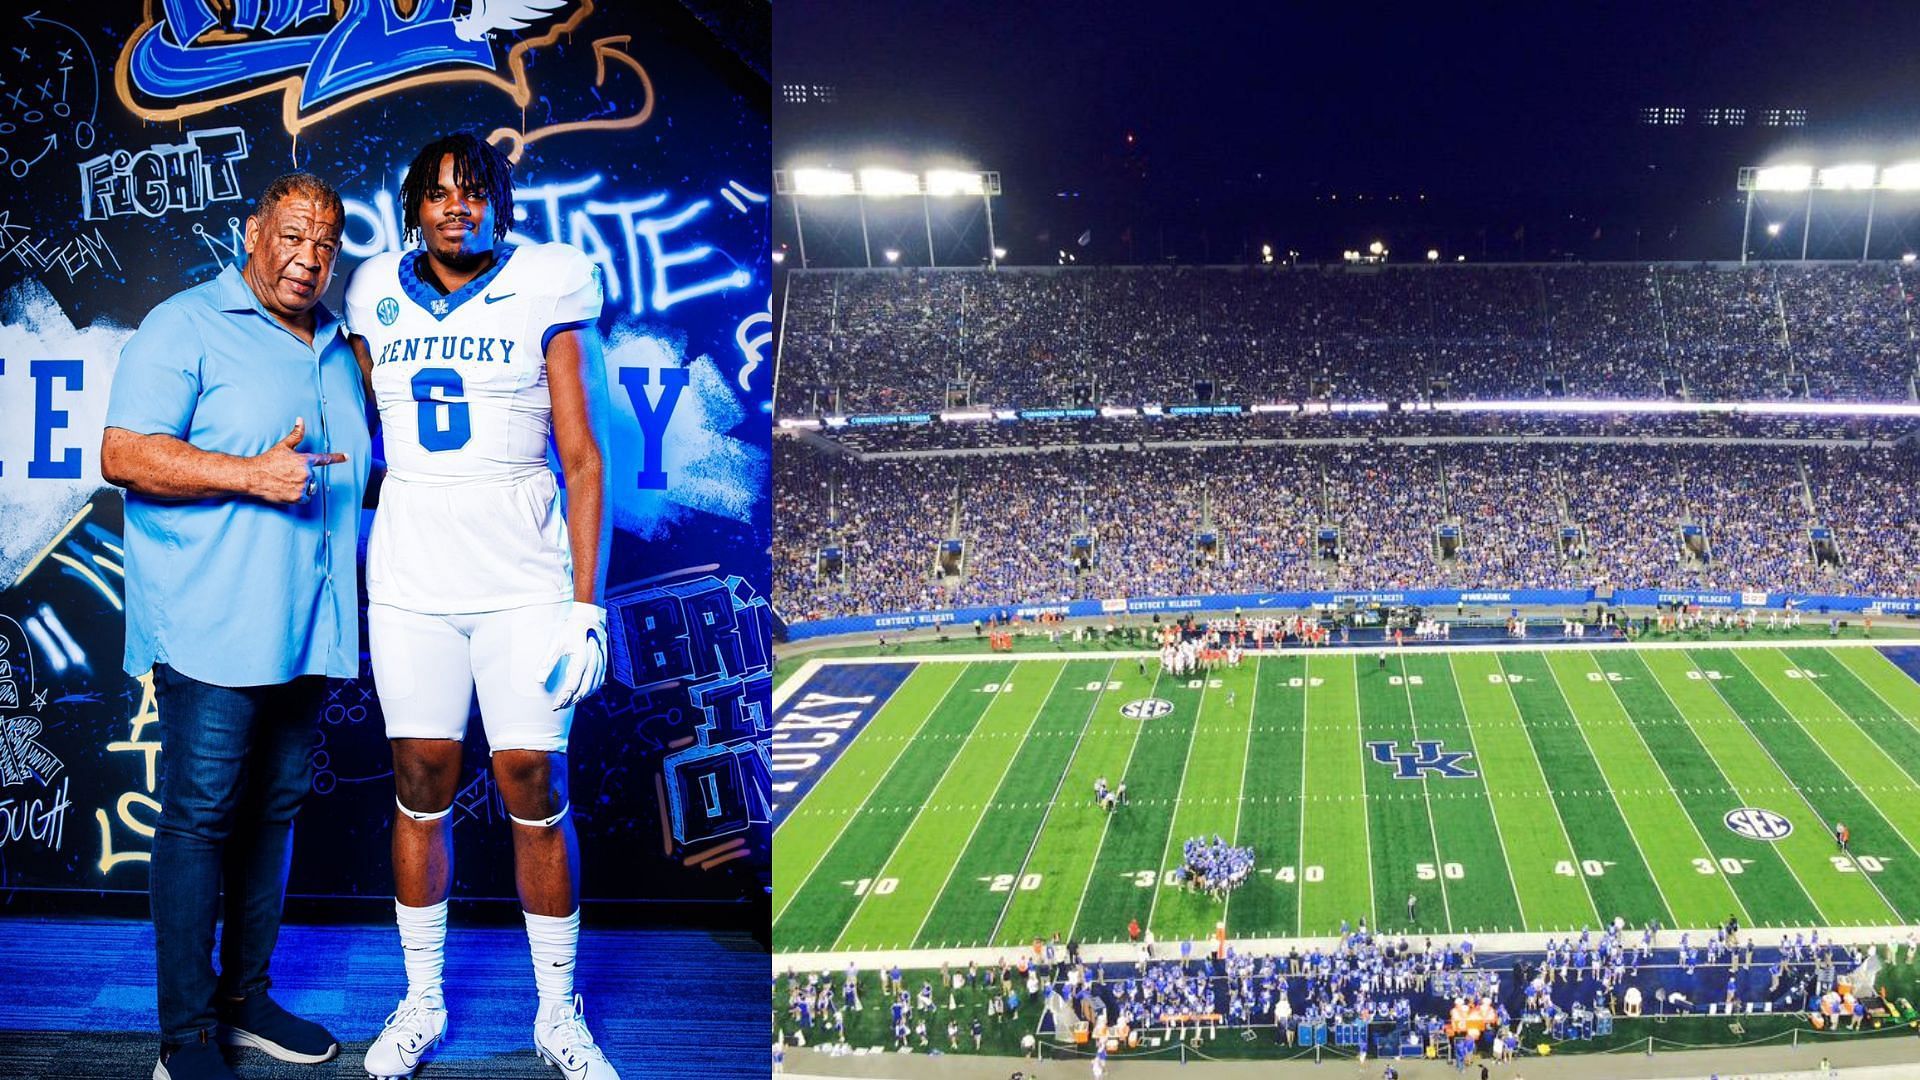 Picture Sources: @JaveonCampbell, @UKFootball (X)